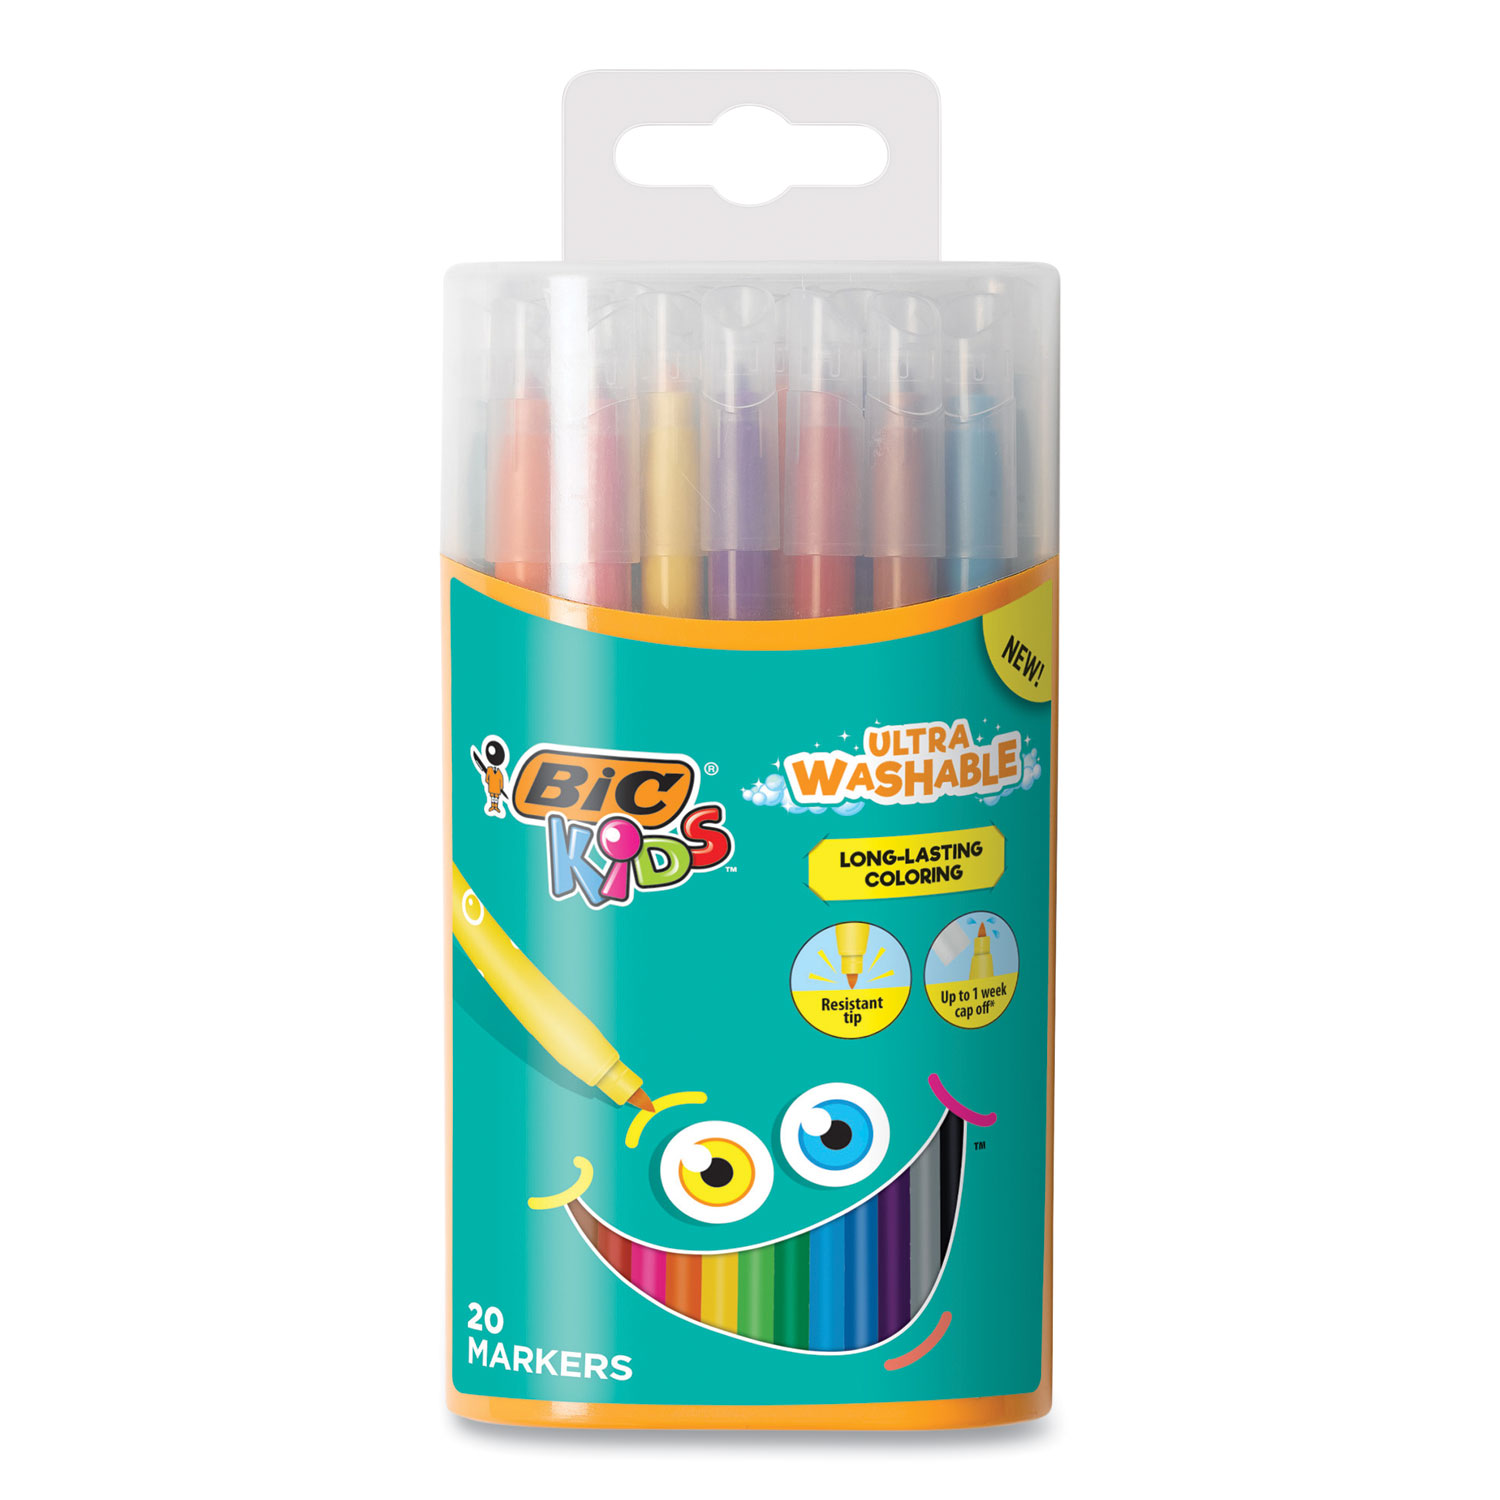 Bic Kids Coloring Combo Pack in Durable Case 12 Each Colored Pencils Crayons Markers